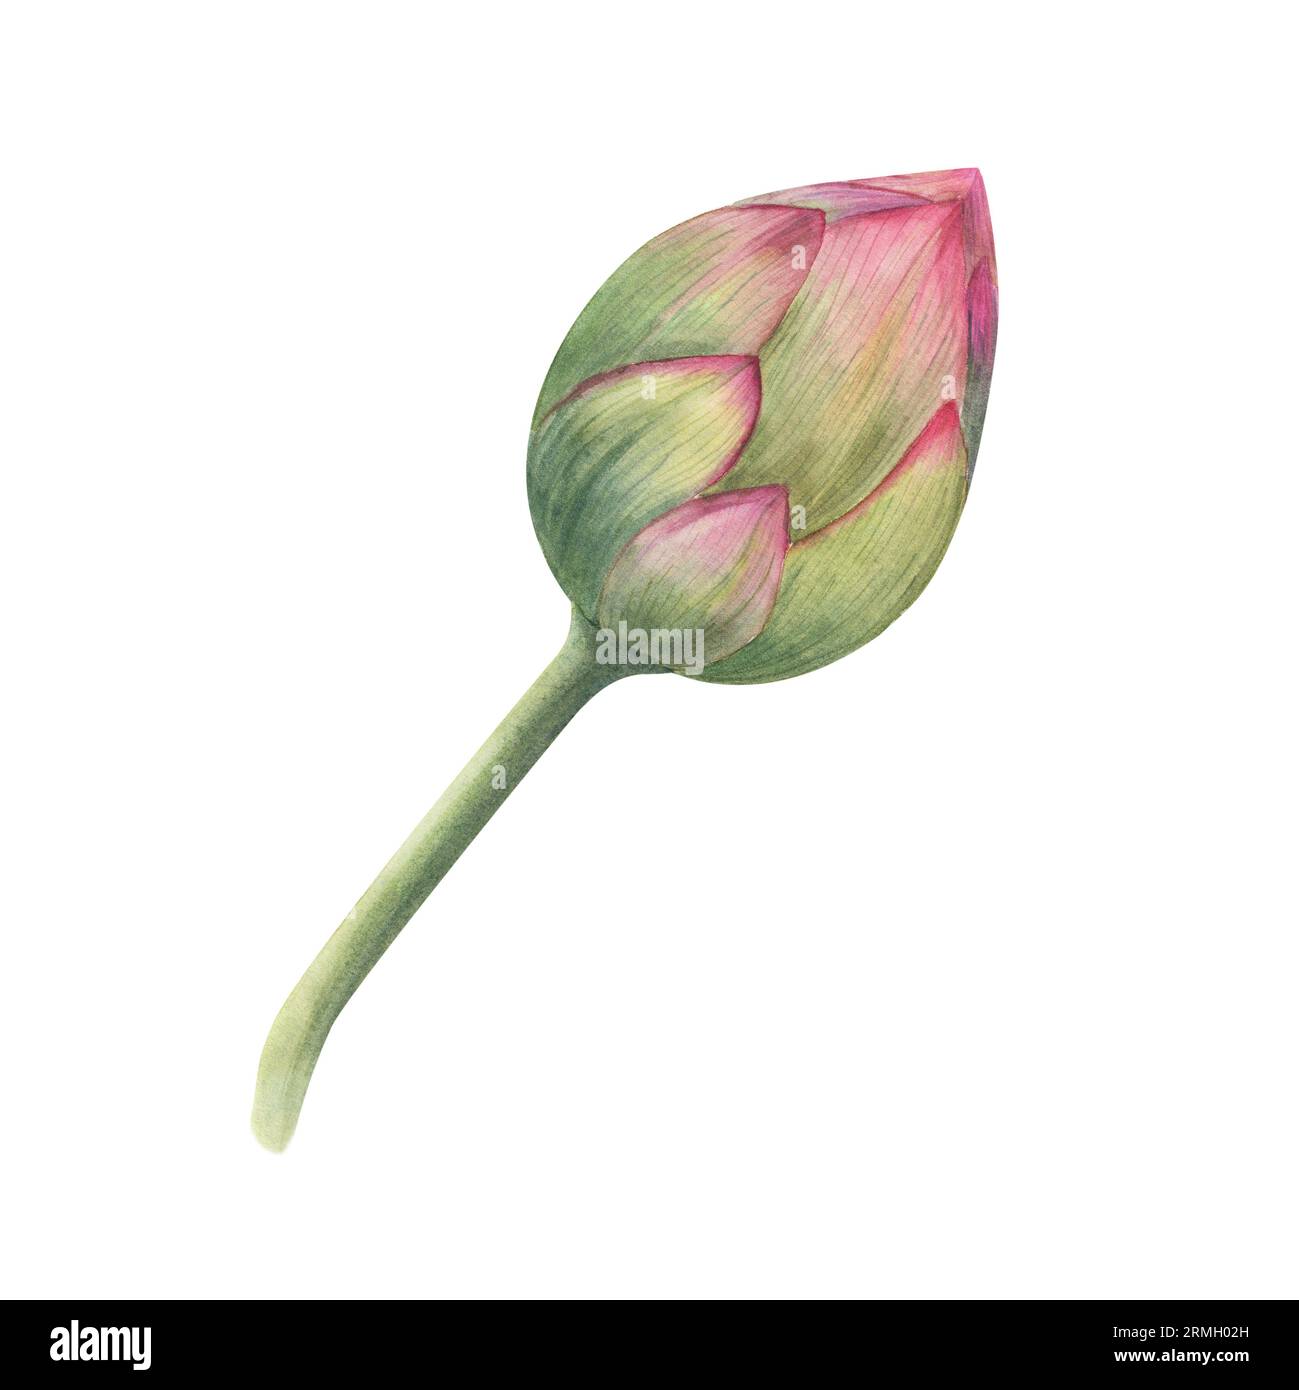 Lotus bud. Single pink water lily. Watercolor illustration isolated on white background. Hand drawn composition for poster, wedding design, yoga cente Stock Photo